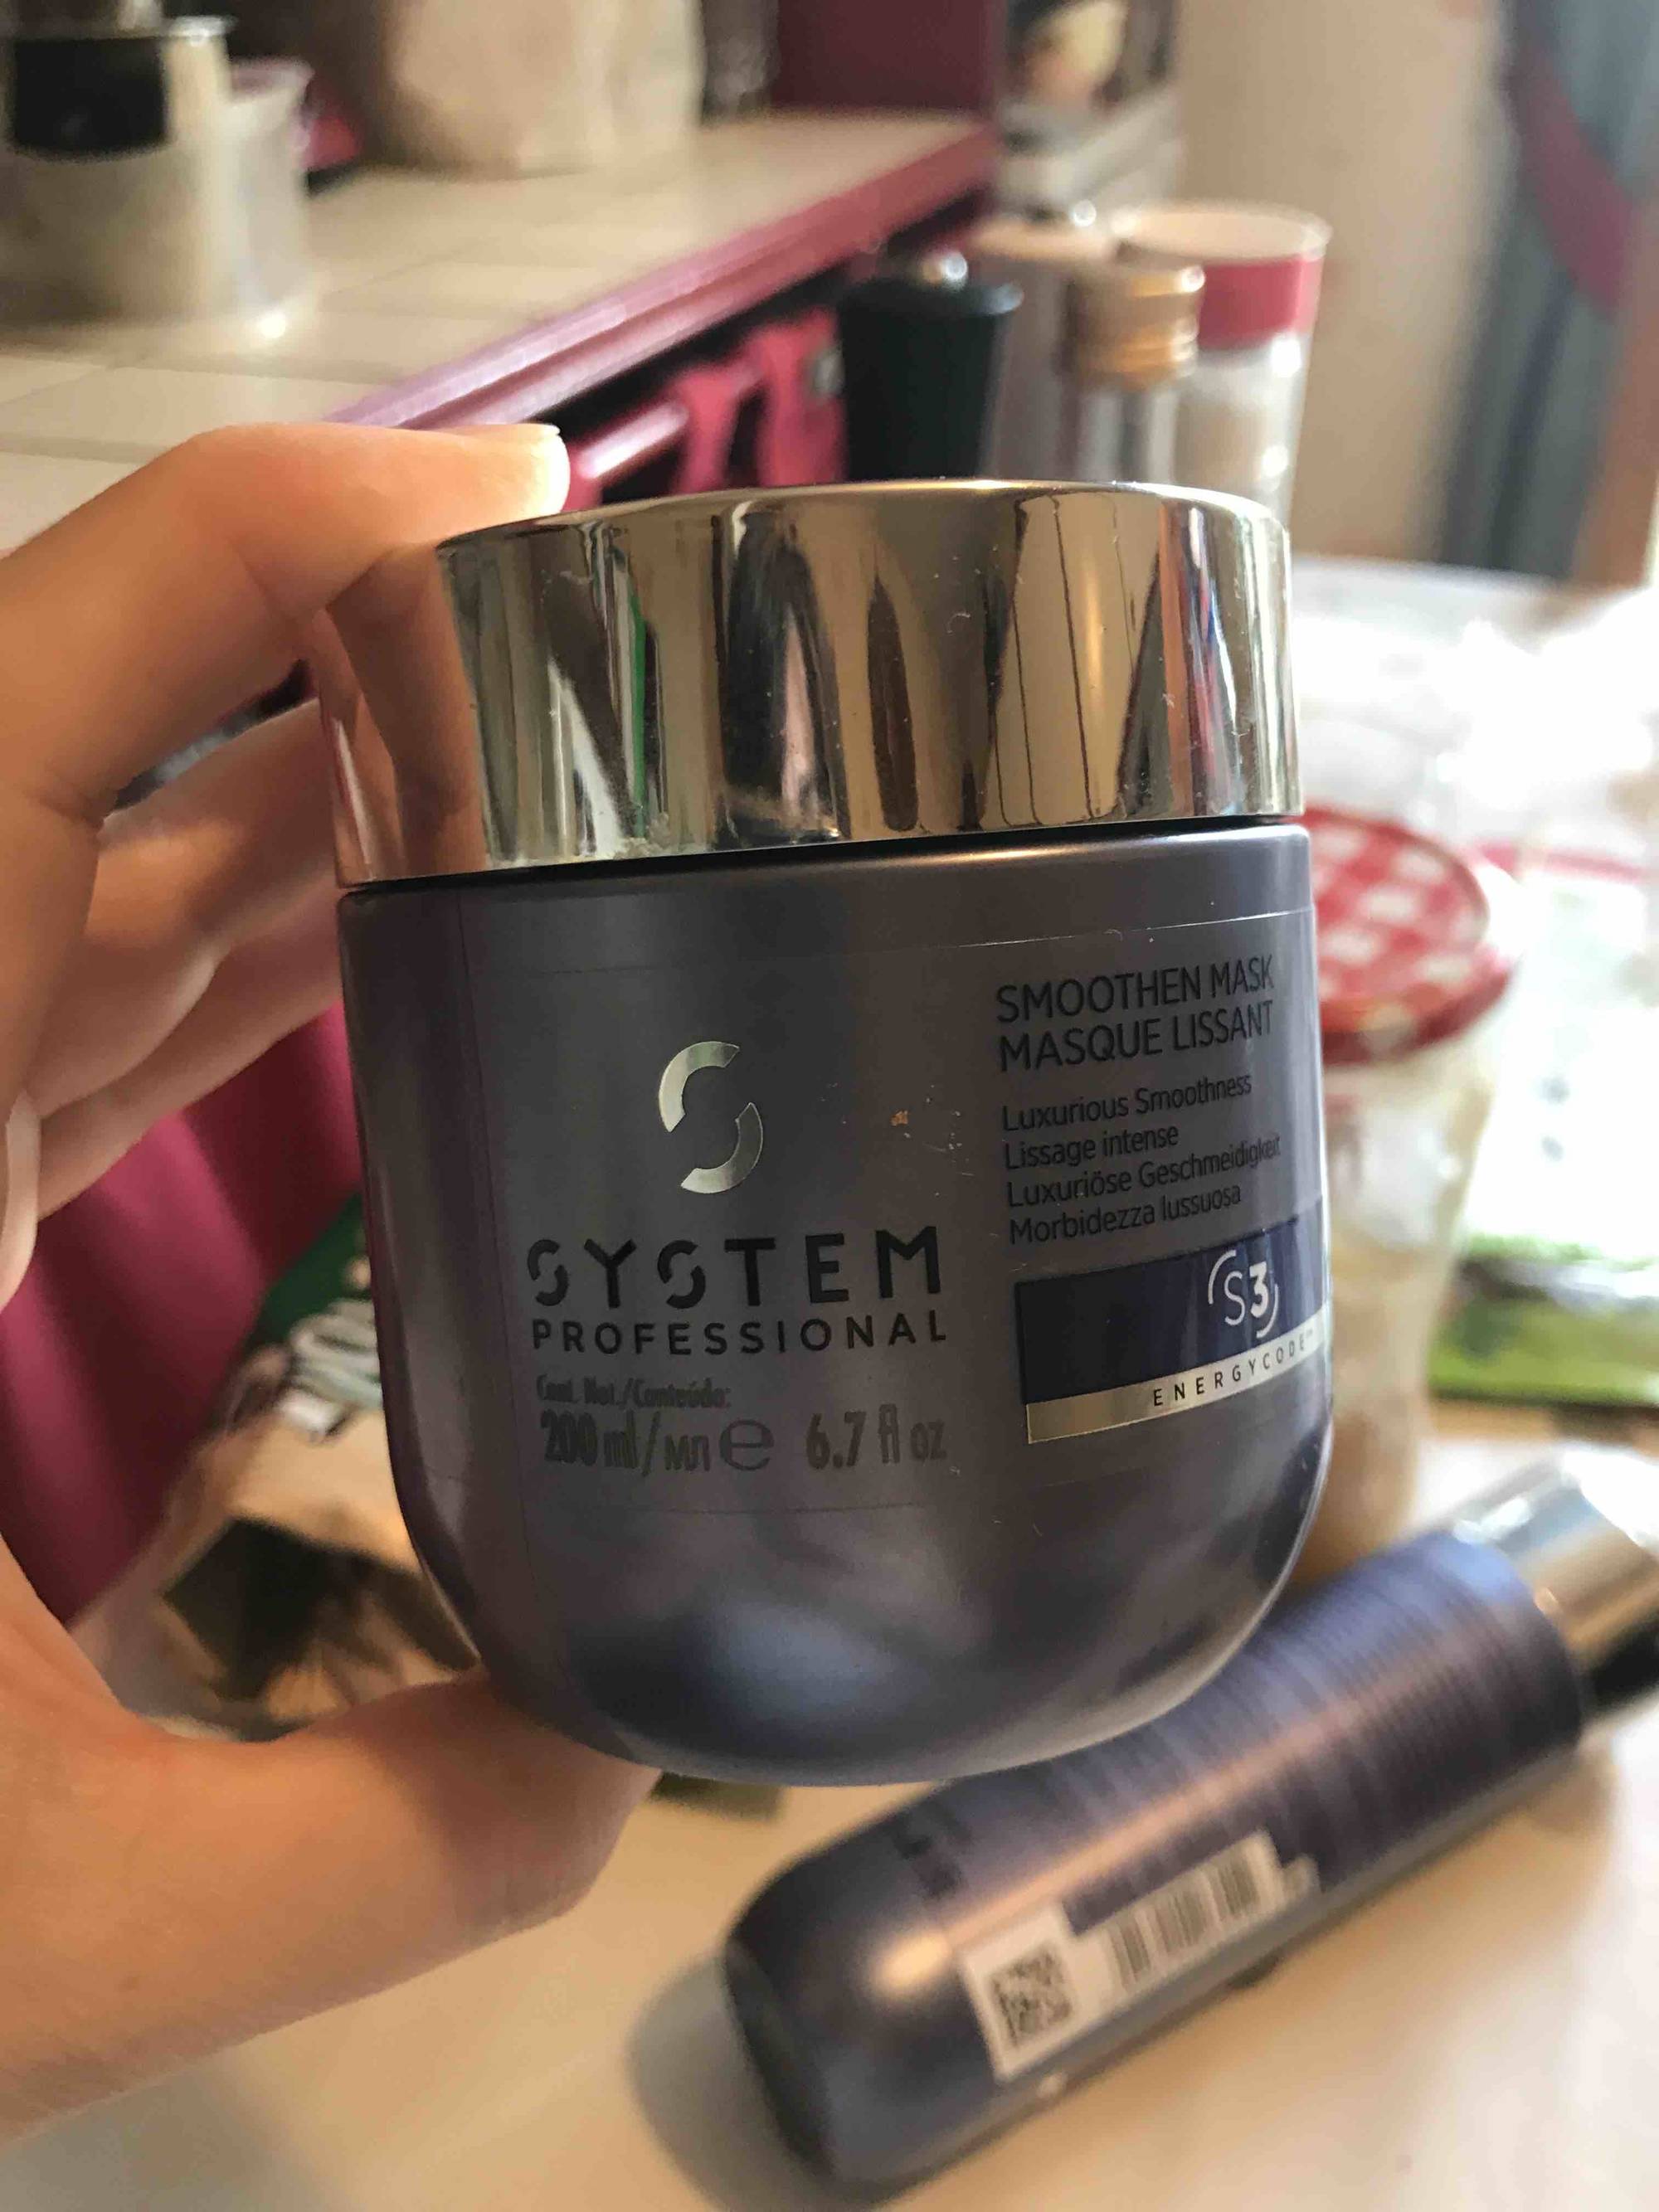 SYSTEM PROFESSIONAL - Masque lissant